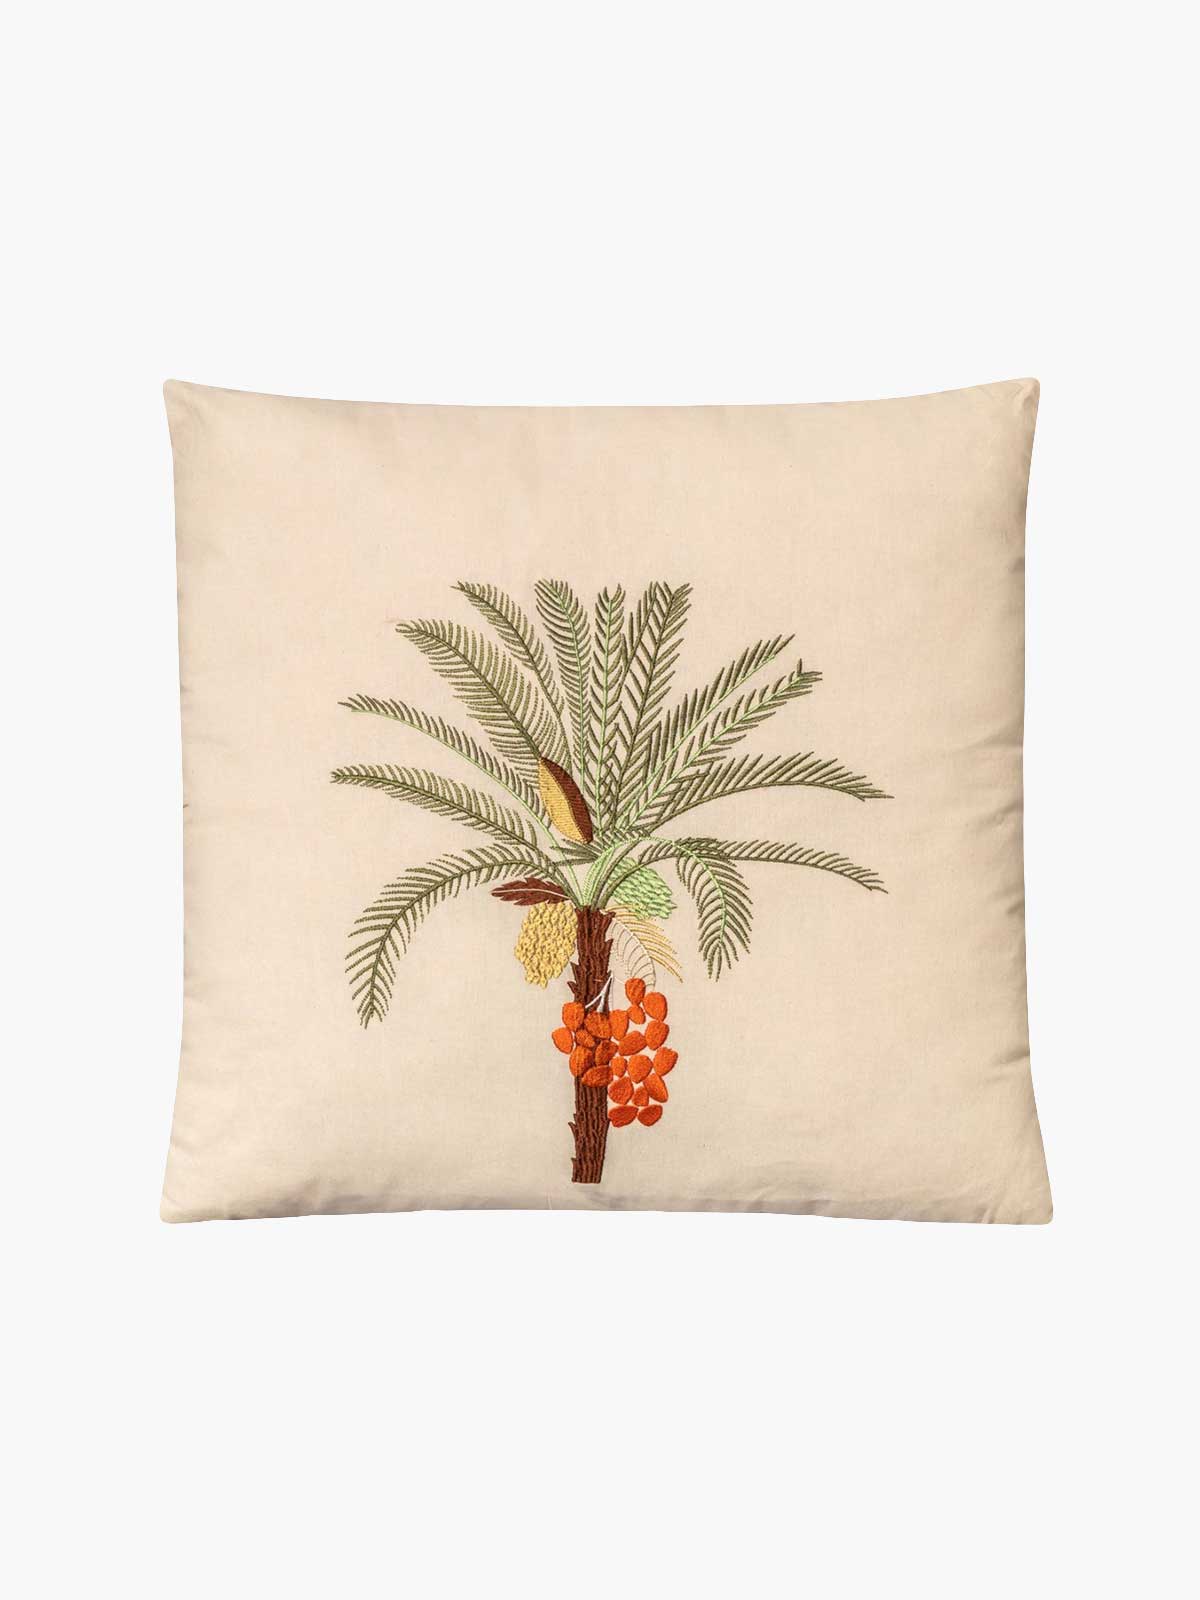 Palm Tree Embroidered Cushion Cover | Green Palm Tree Embroidered Cushion Cover | Green